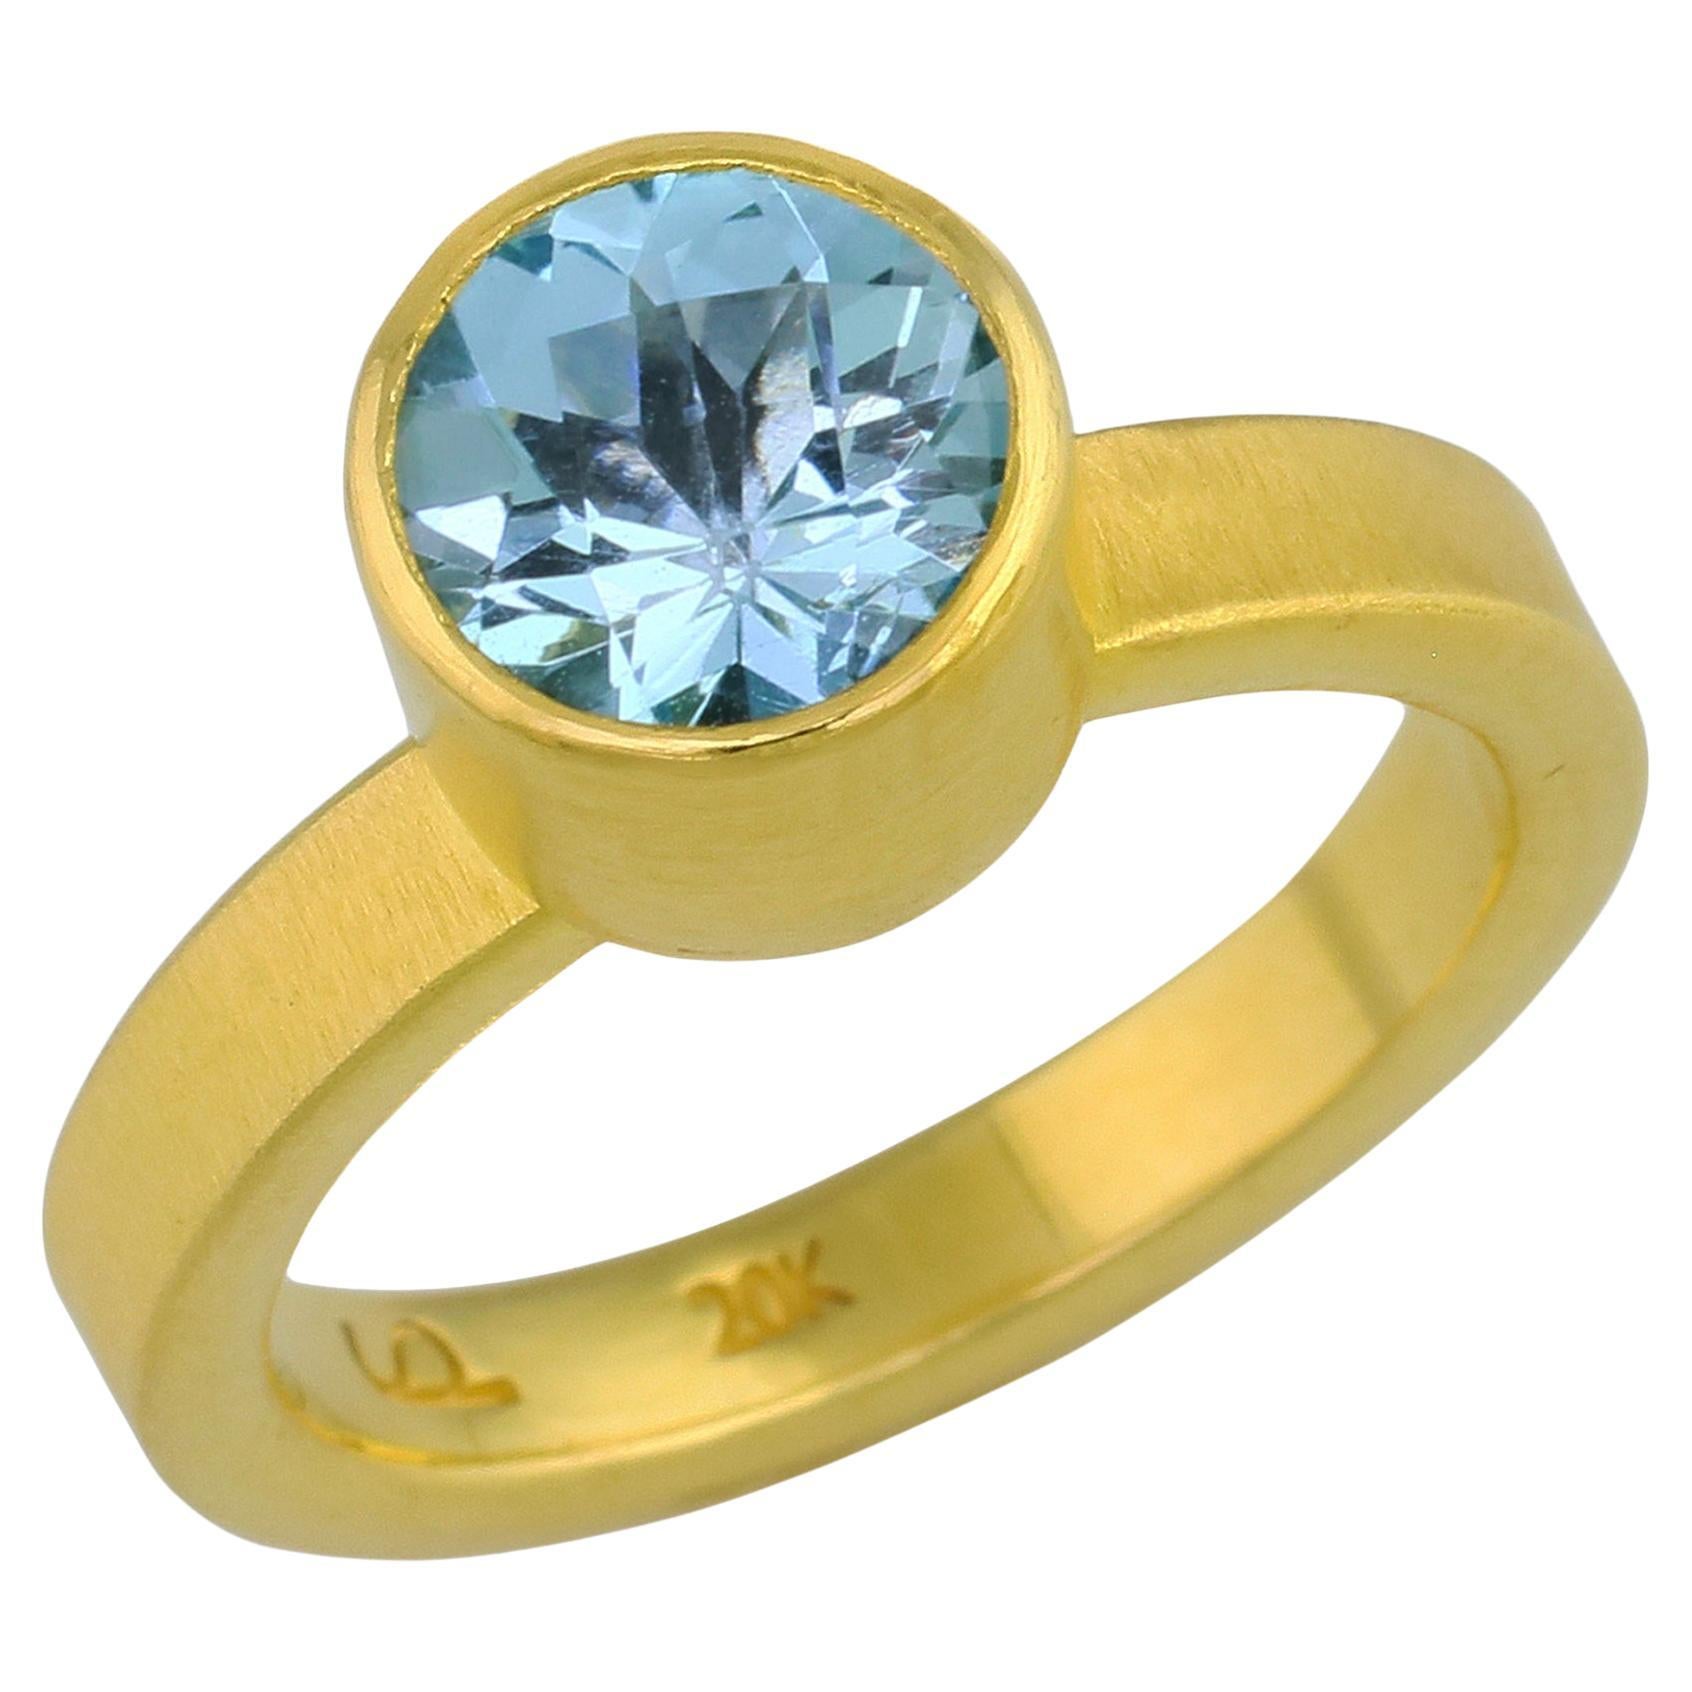 PHILIPPE SPENCER 2.5 Ct. Blue Topaz in 22K and 20K Gold Statement Ring